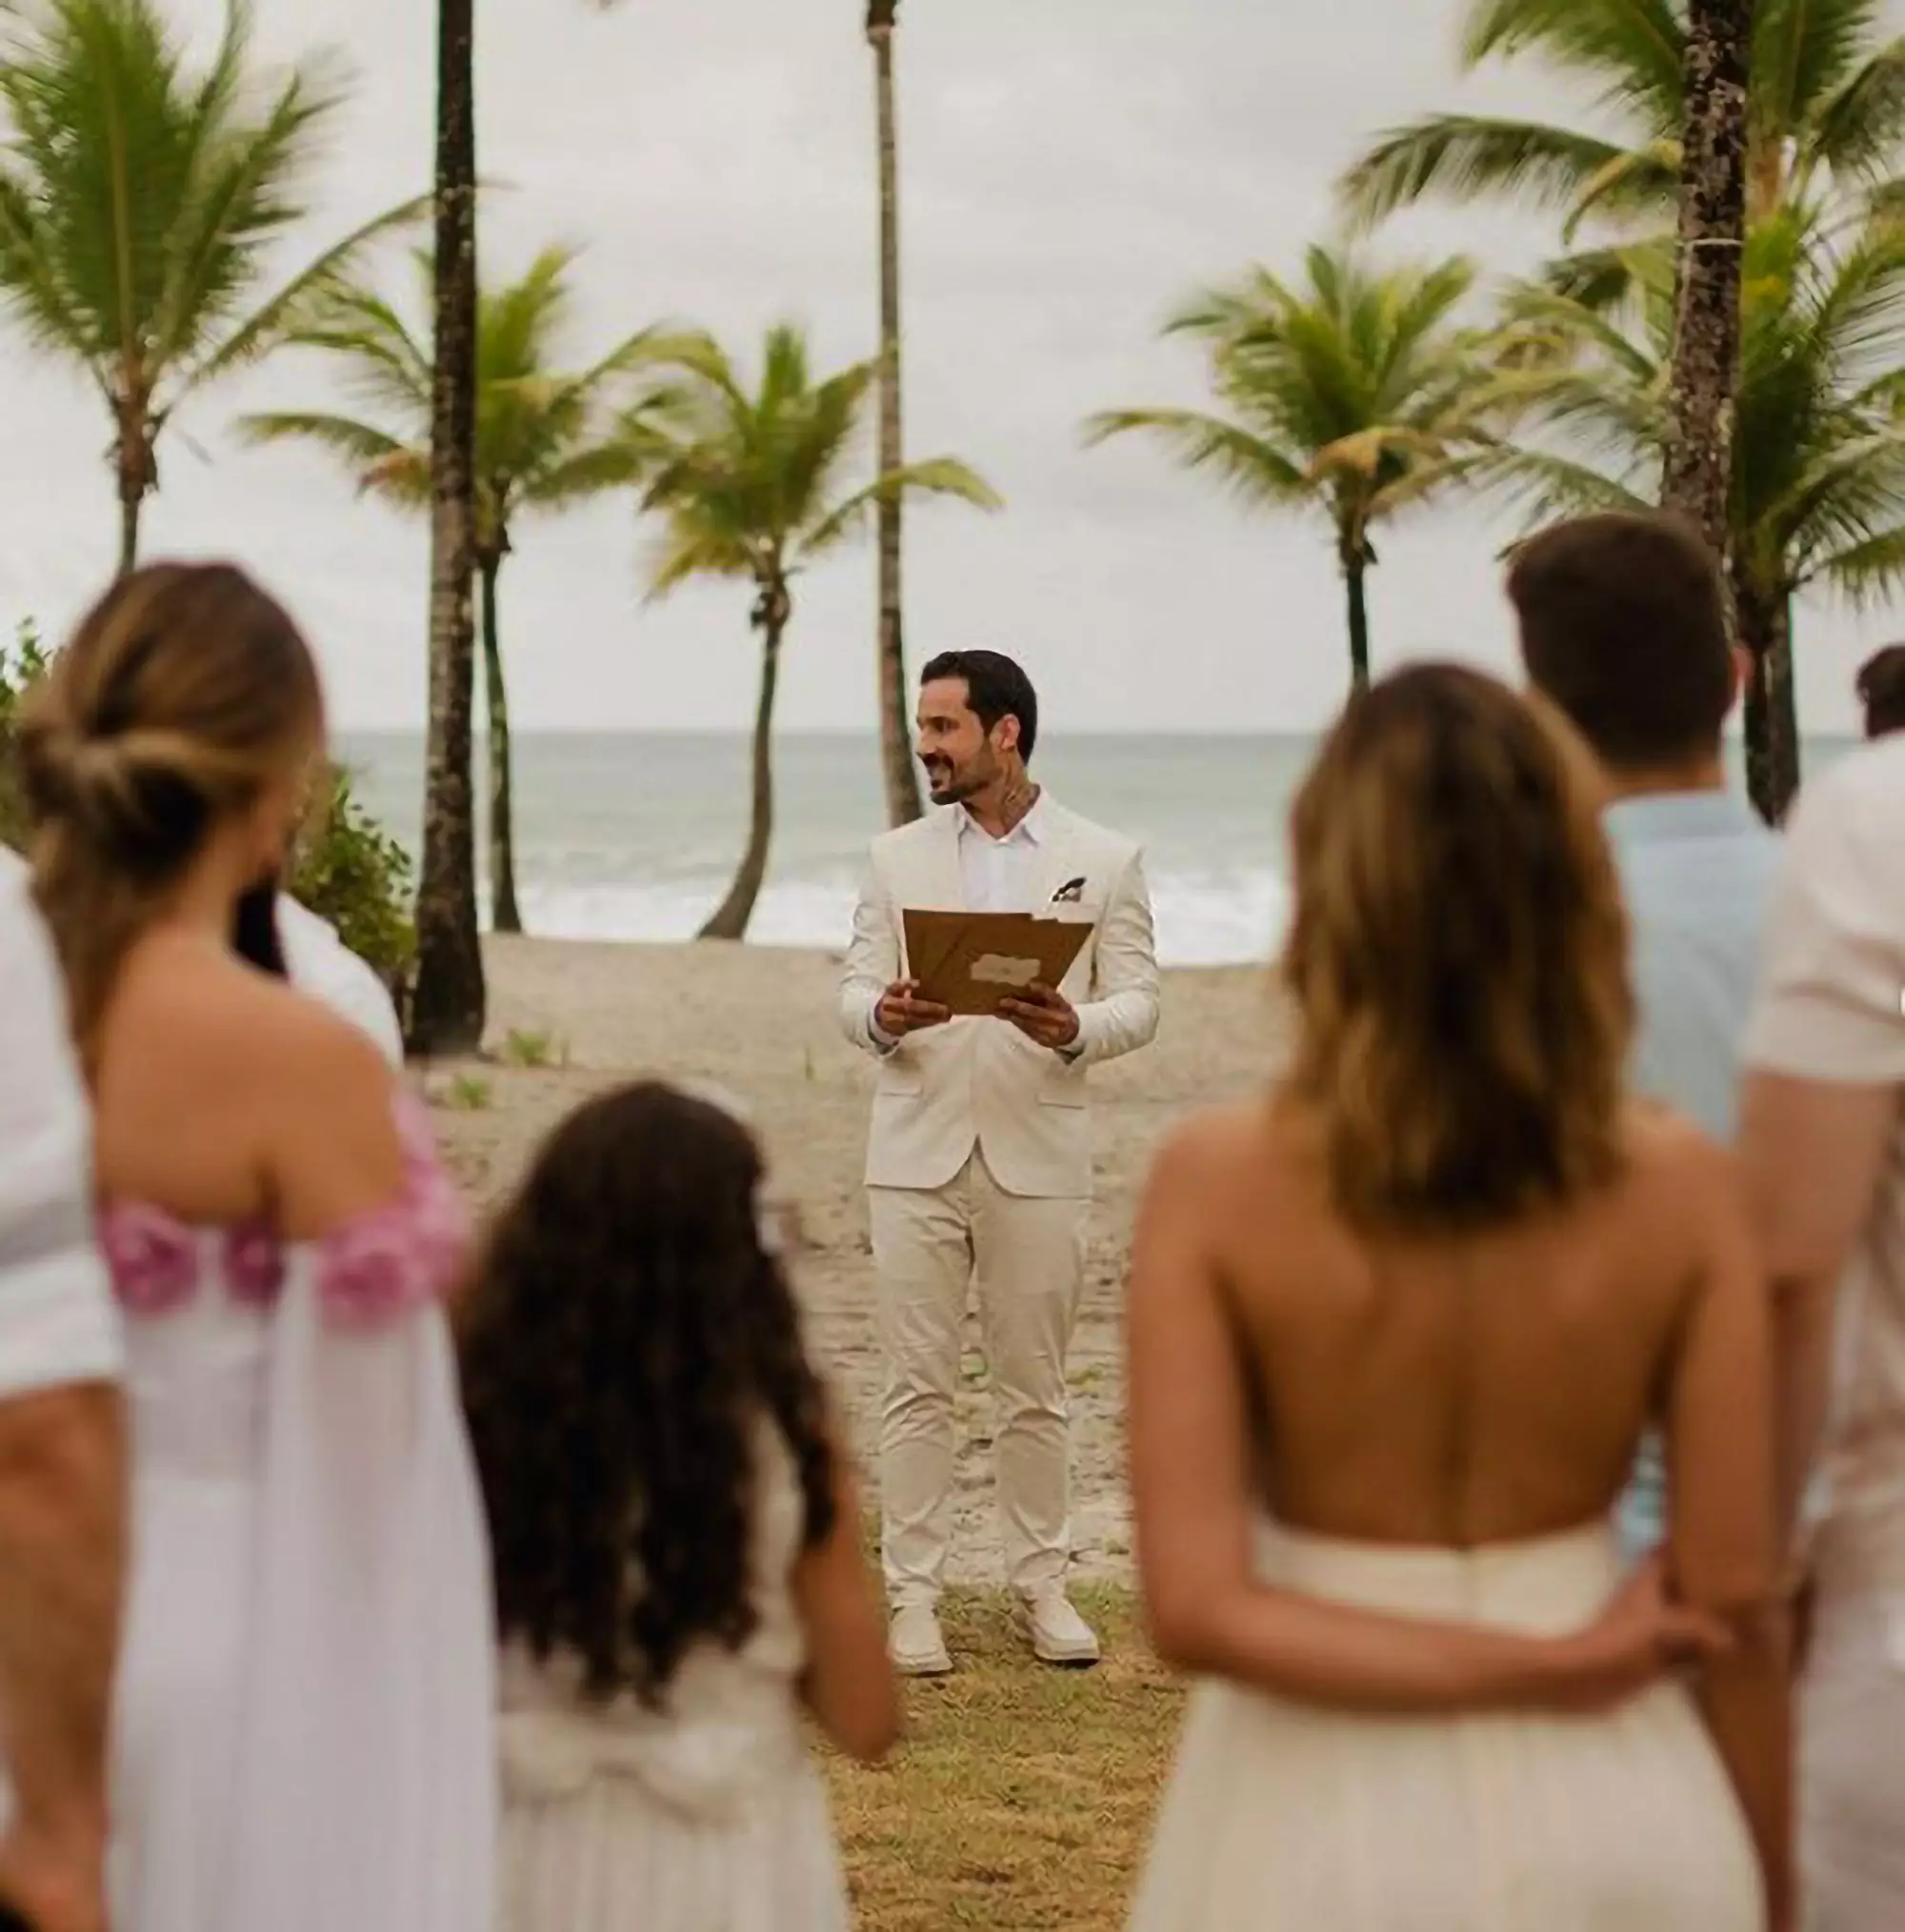 Diogo tied the knot with himself.